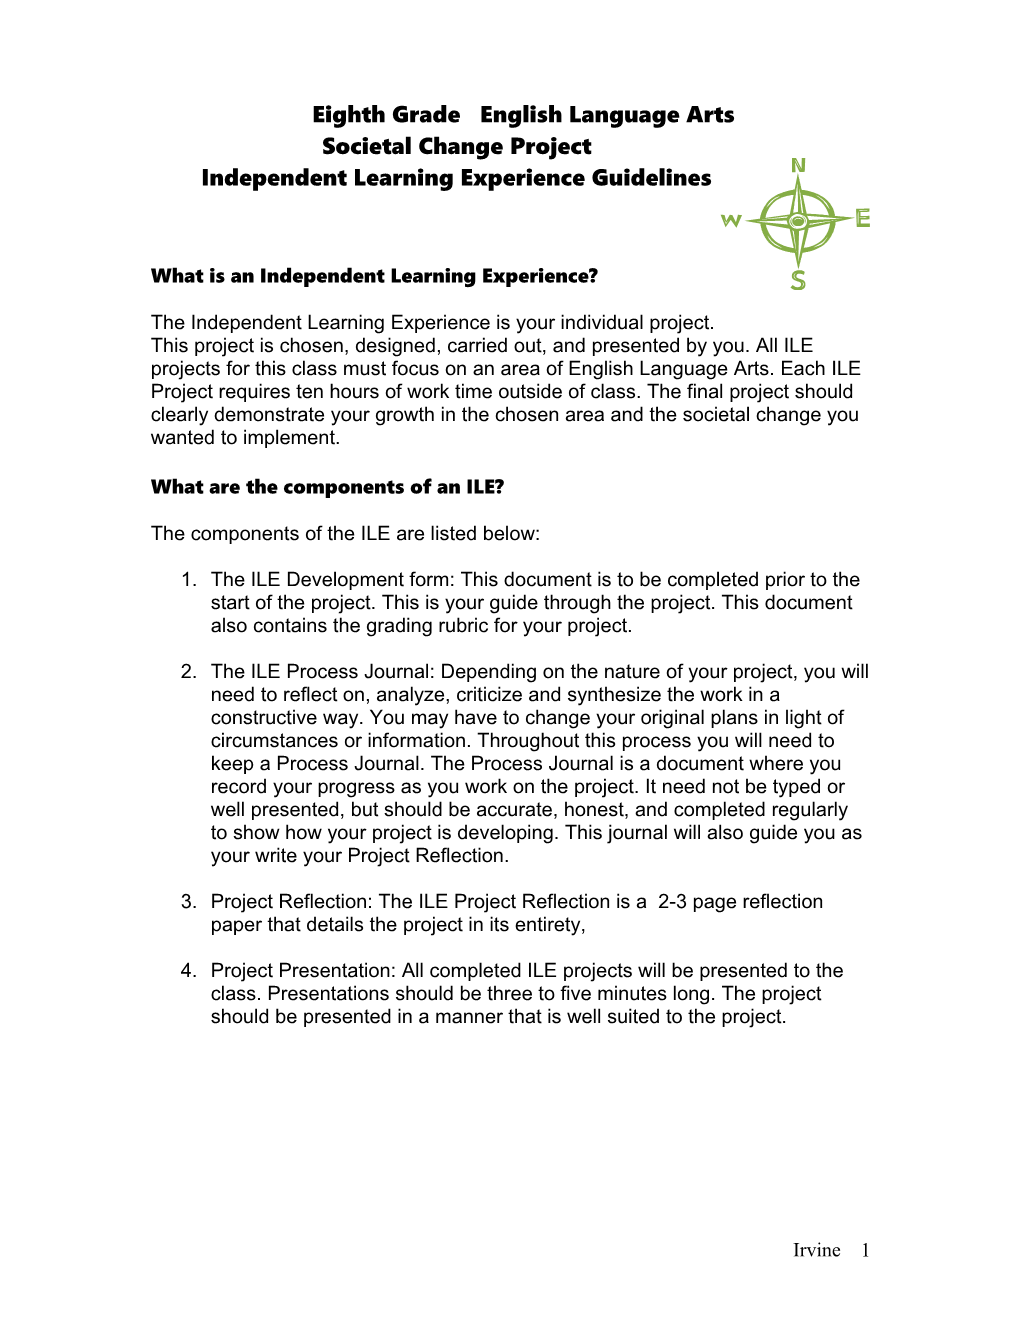 Independent Learning Experience Guidelines